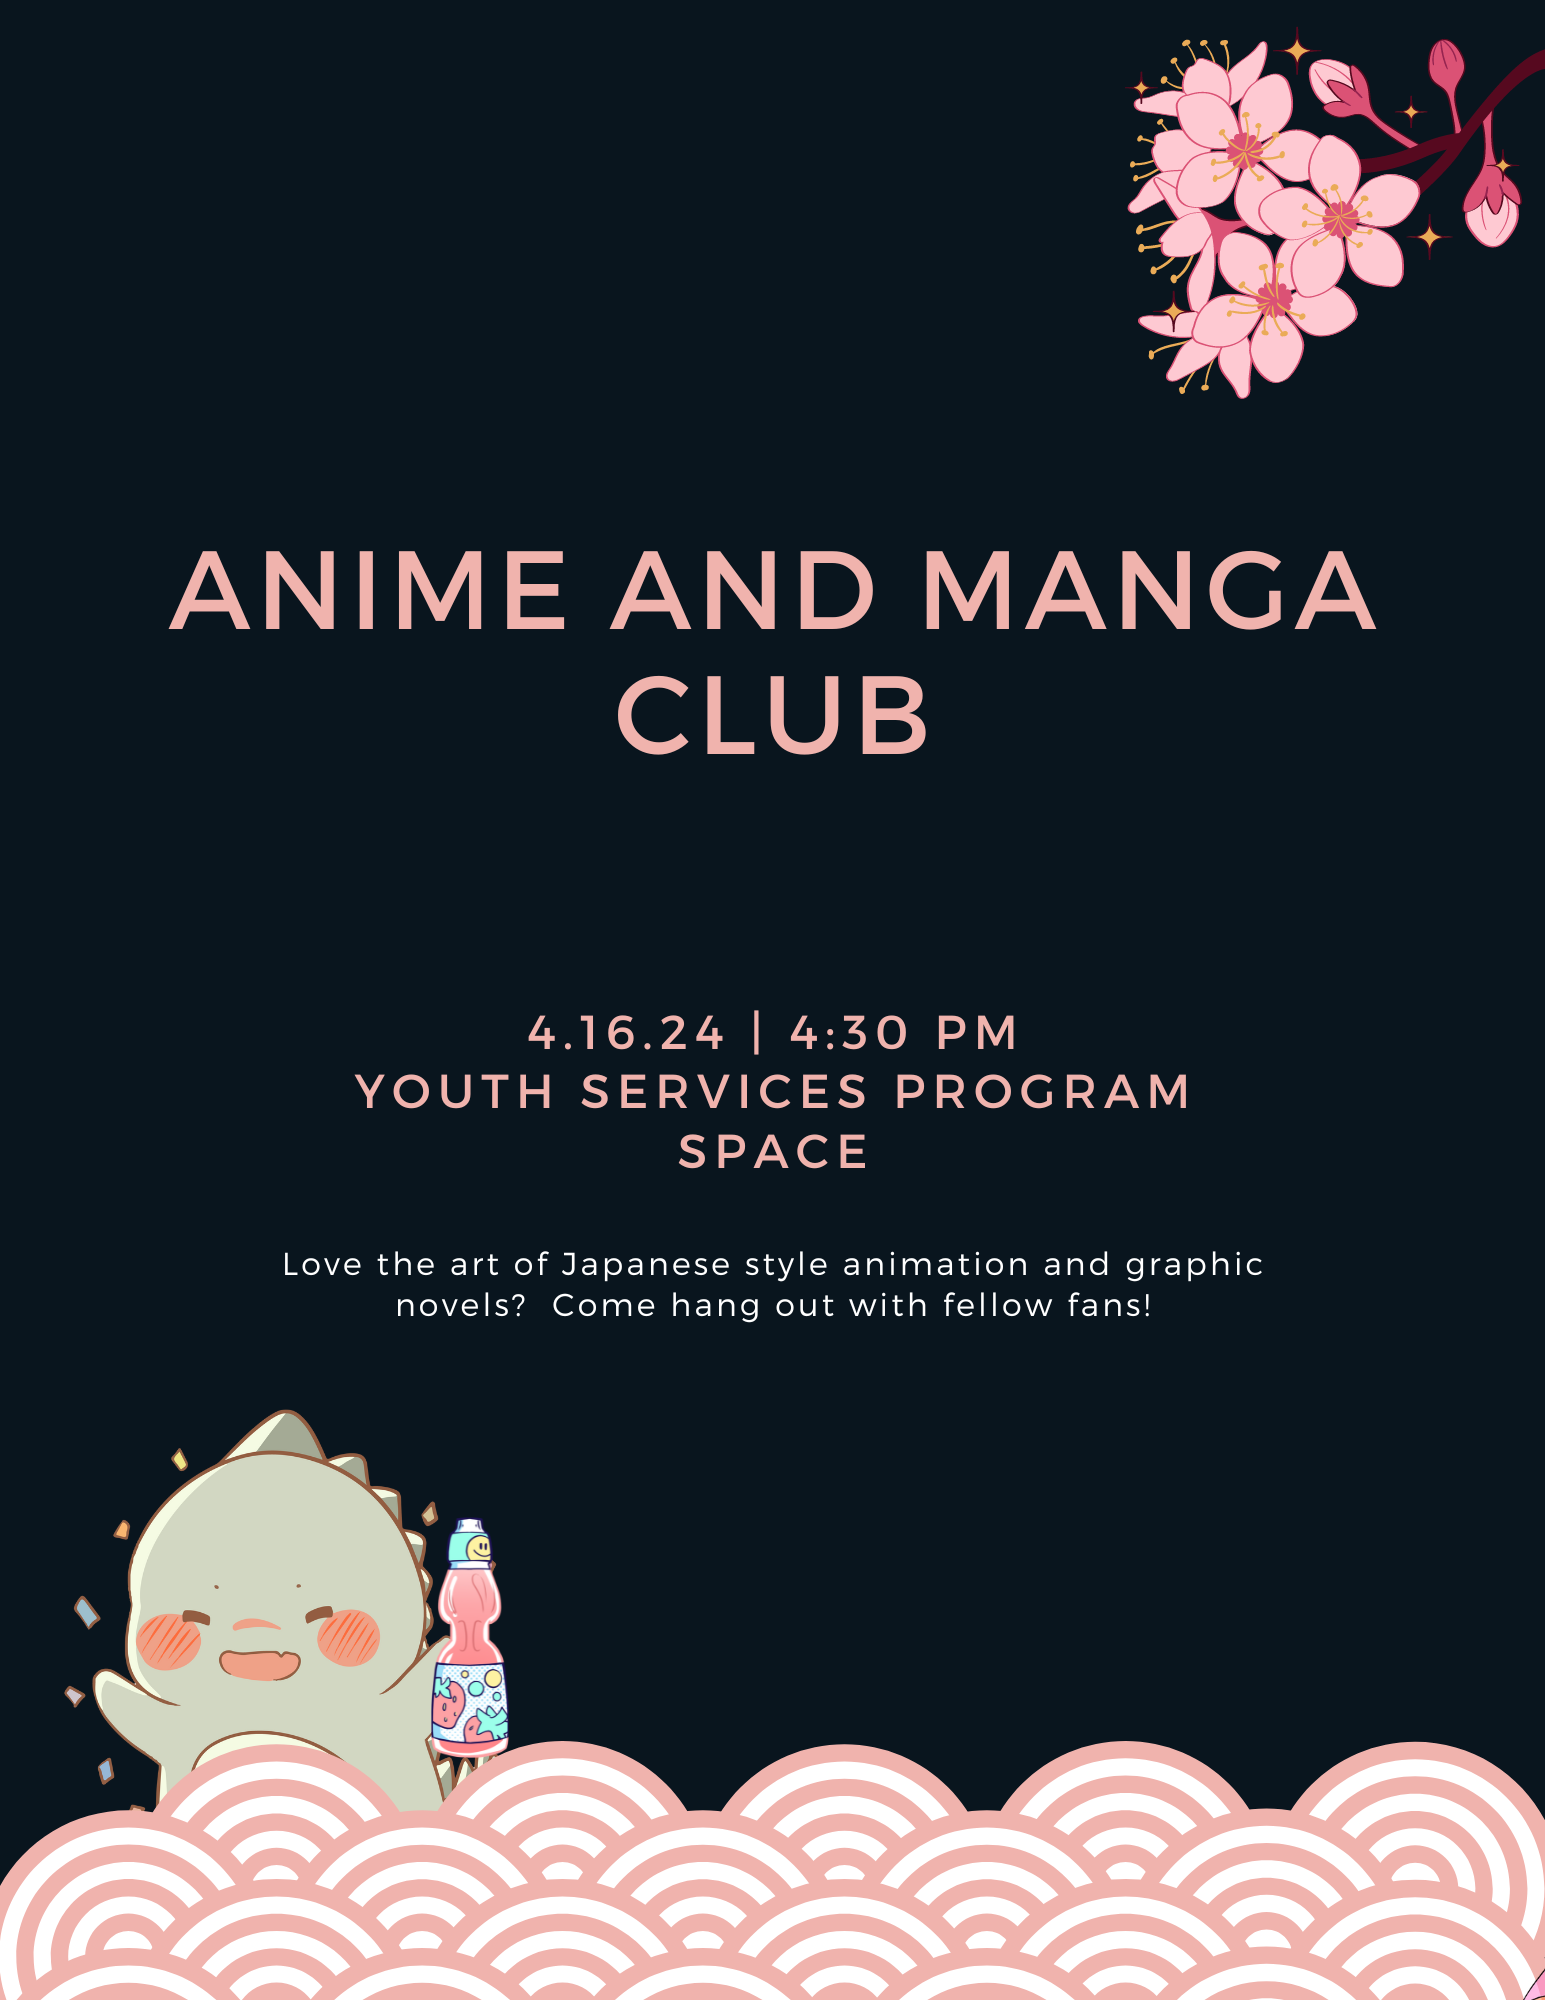 Poster advertising the Anime and Manga club